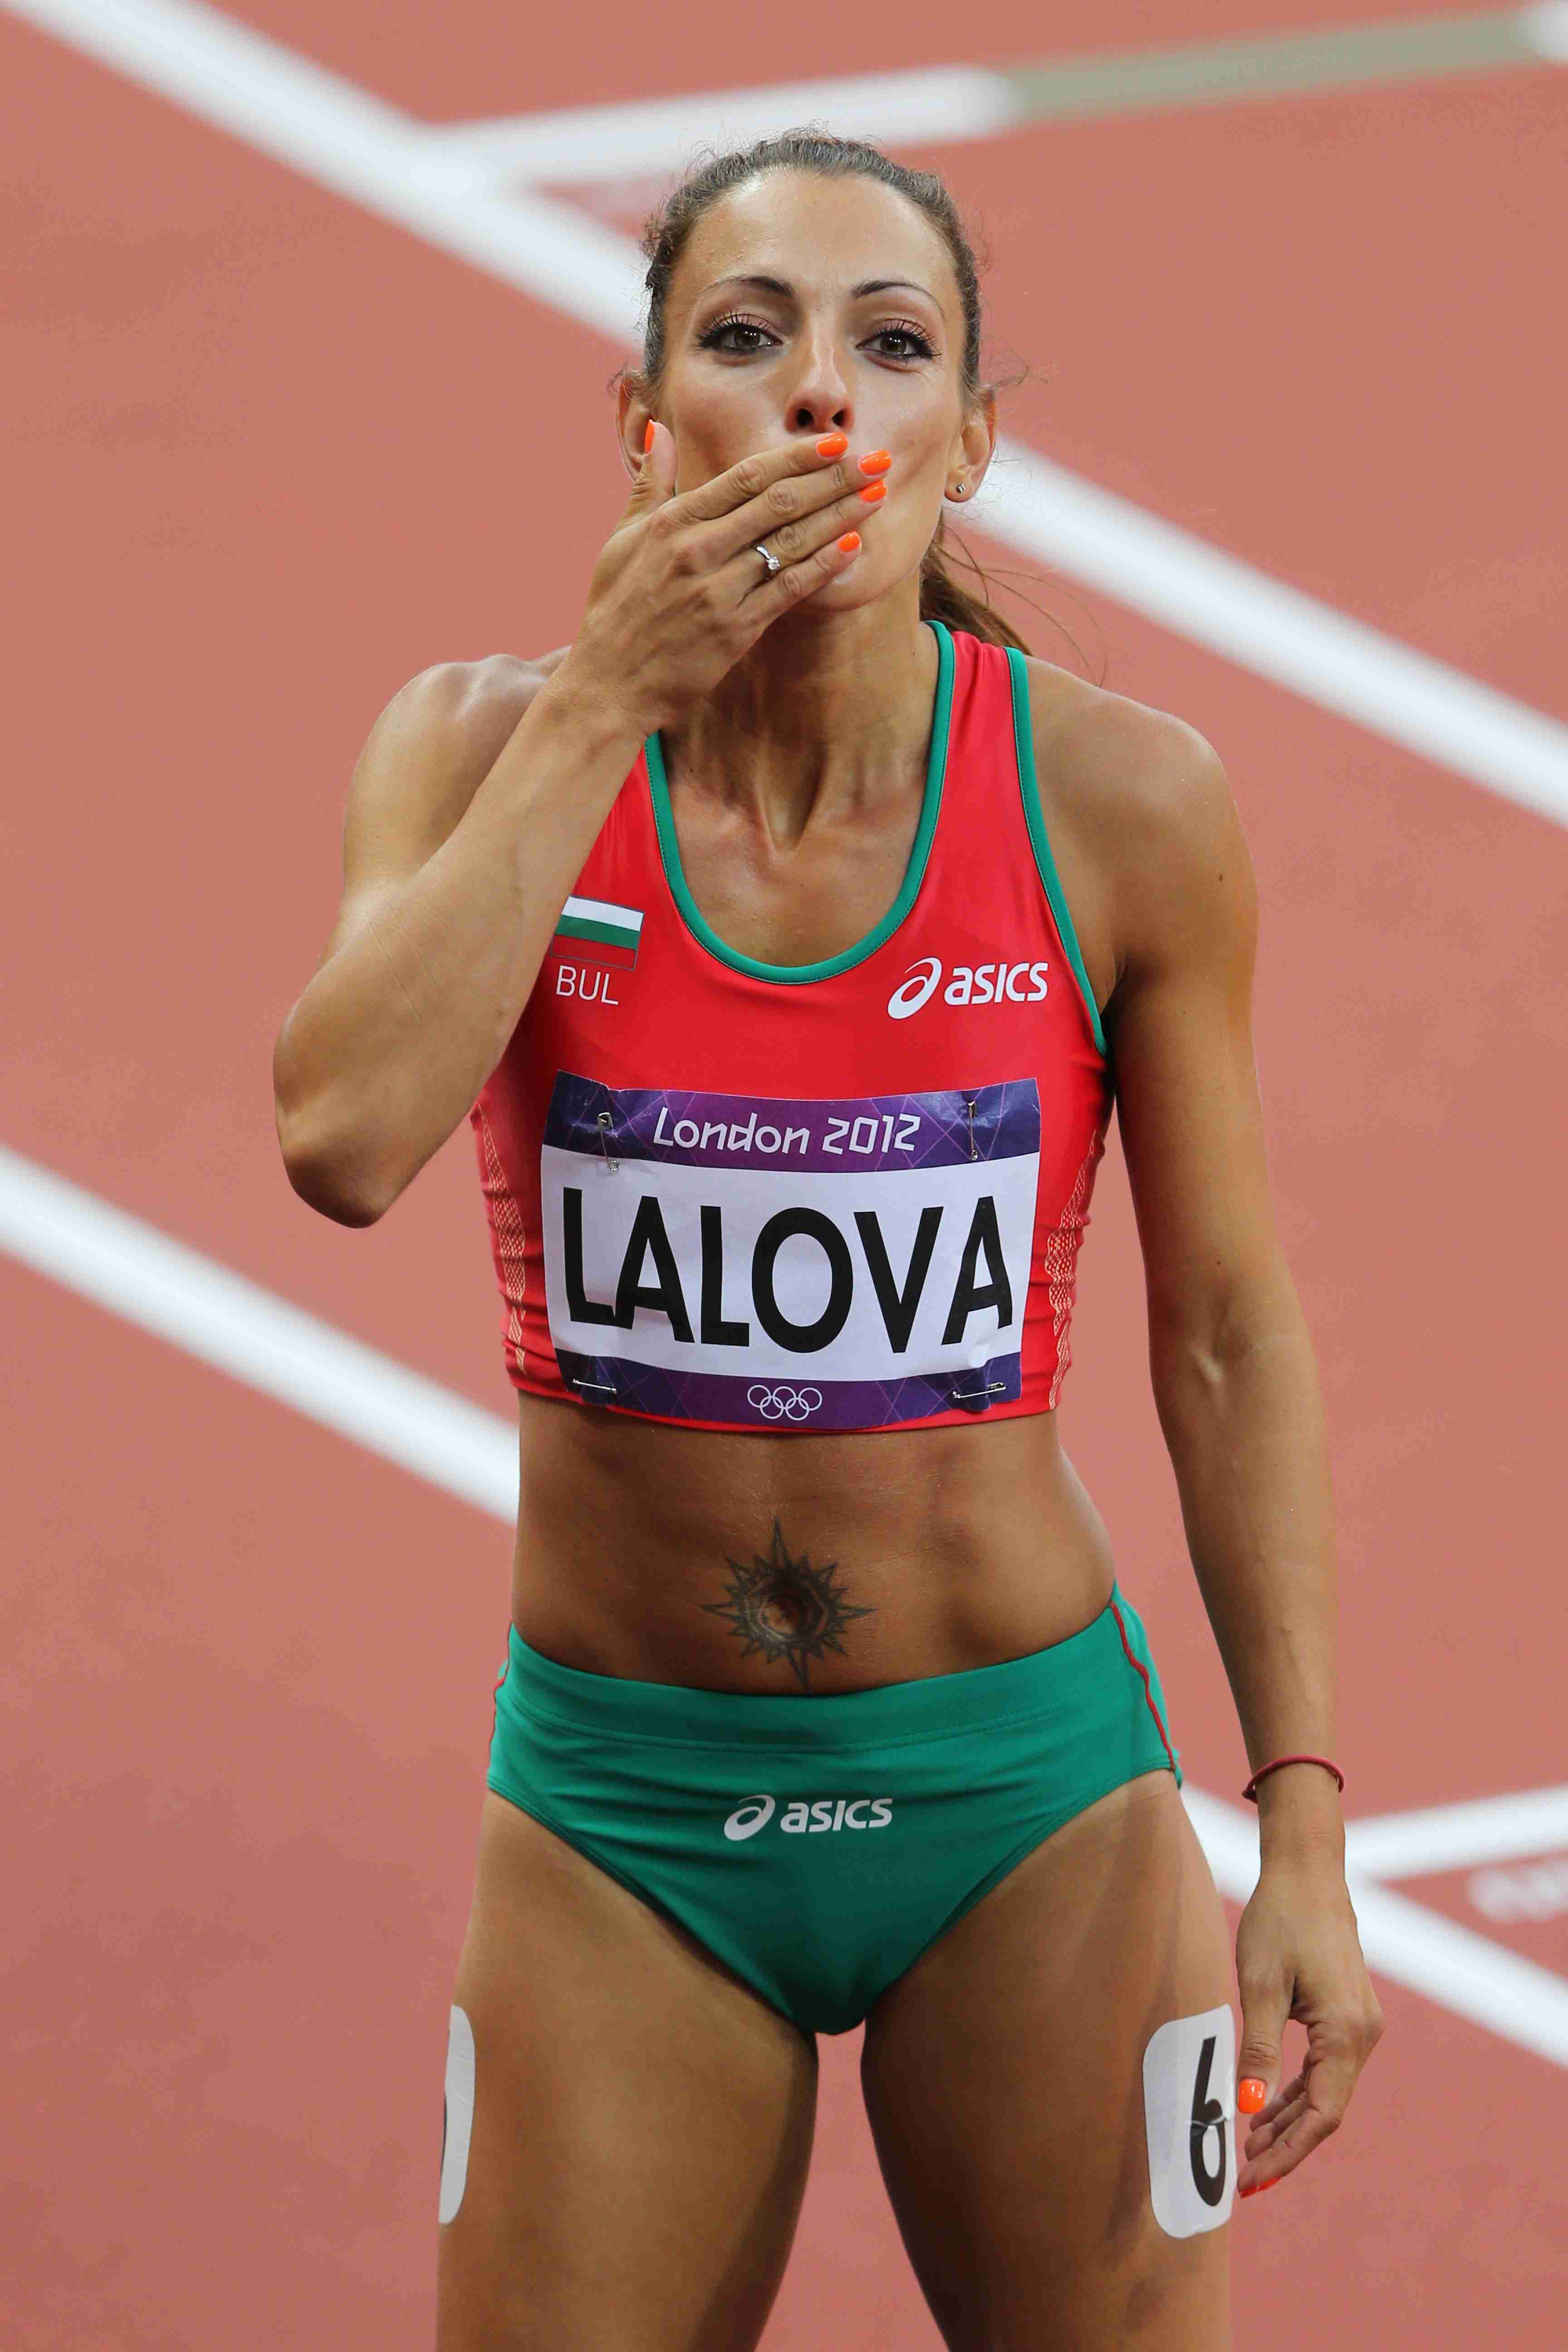 Not in Hall of Fame - Lalova